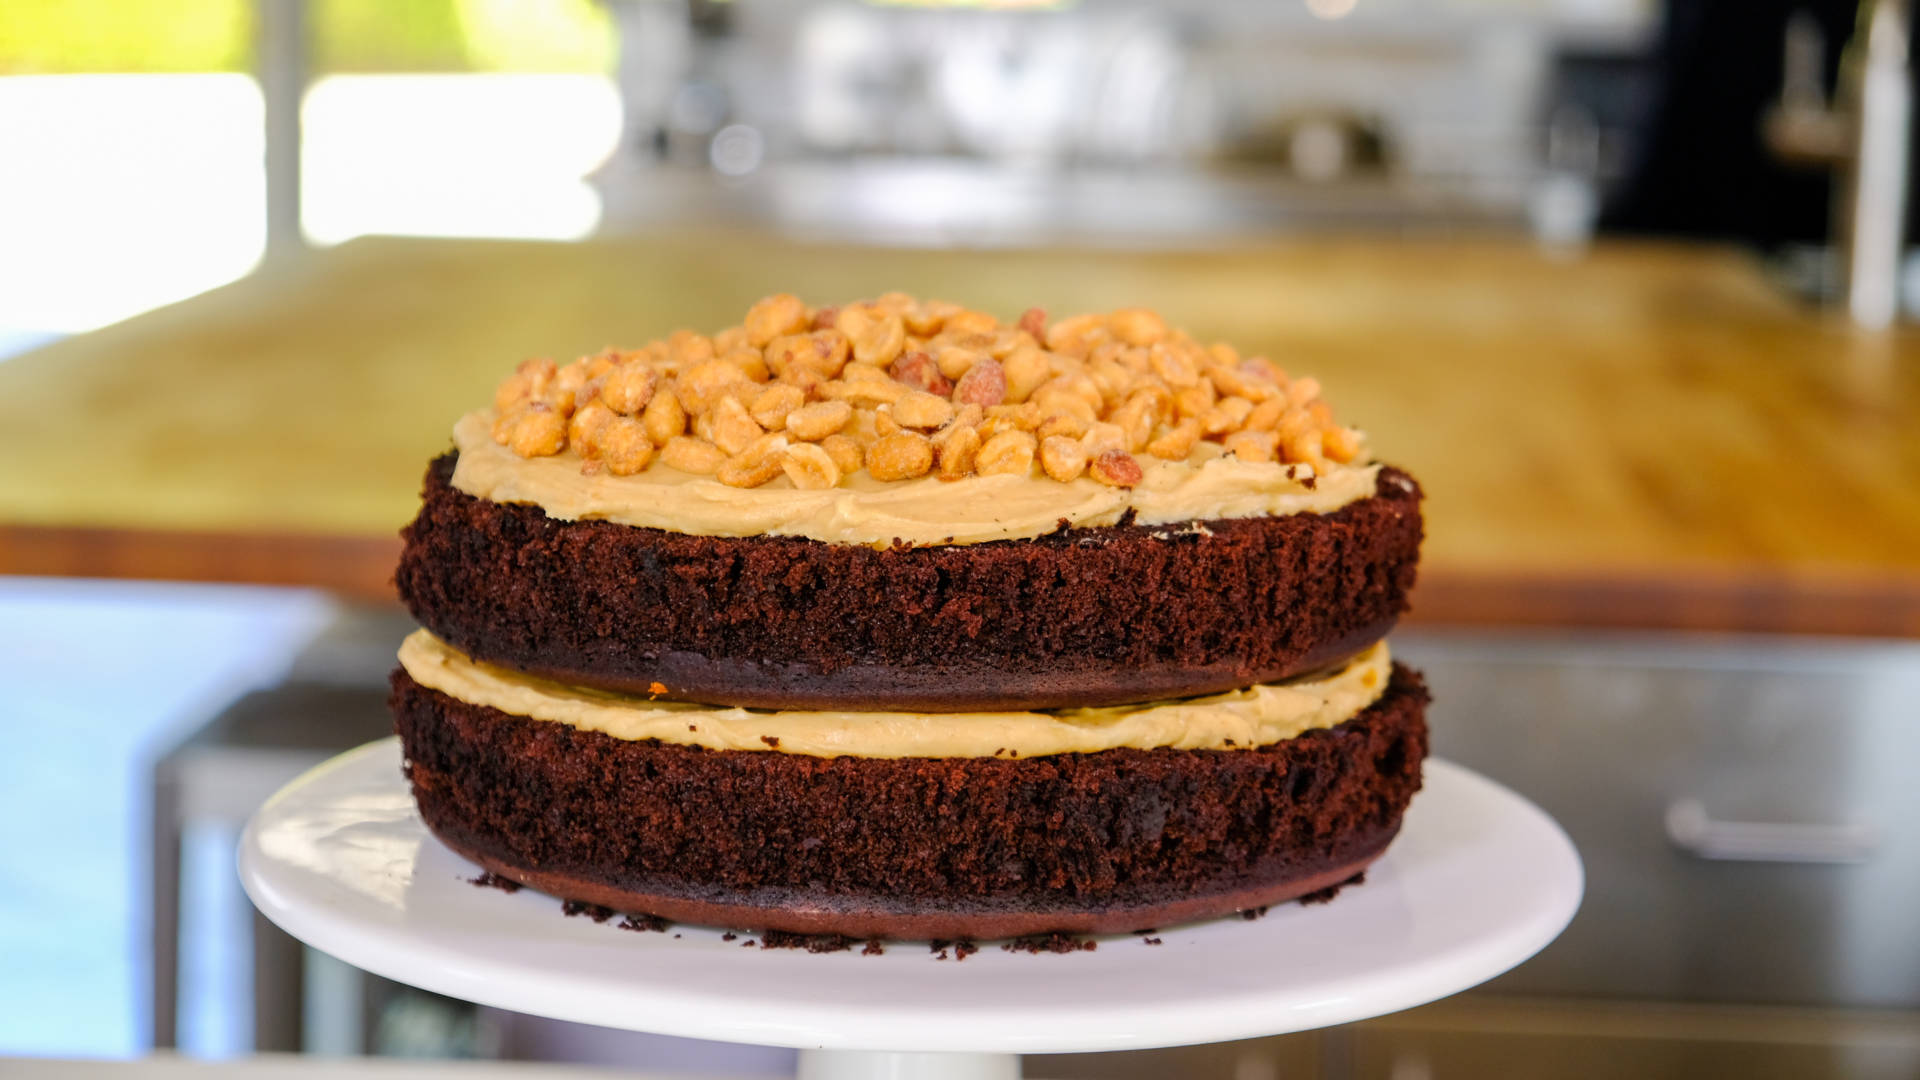 Emily Luchetti's classic chocolate layer cake with peanut butter frosting.